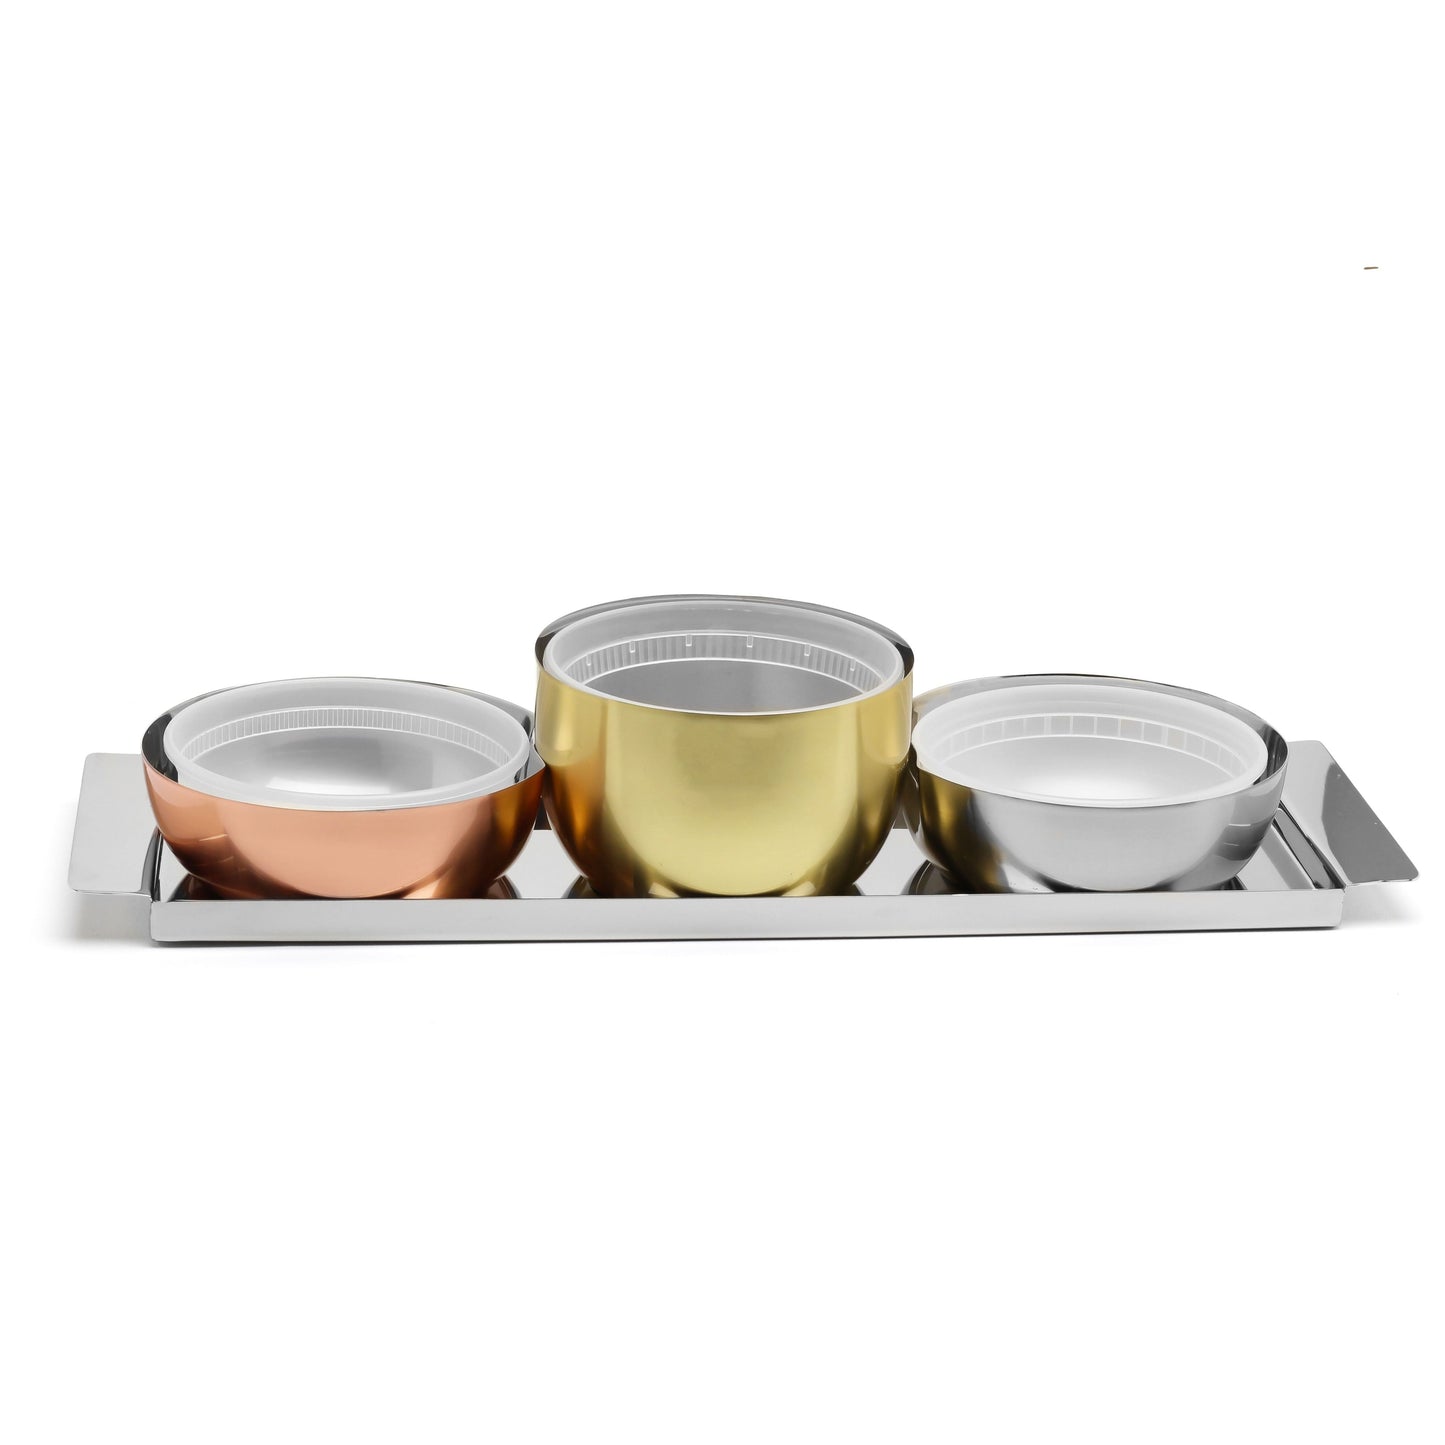 Classic Touch Rectangular Tray With 3 Multi Colored Dip Container Bowls